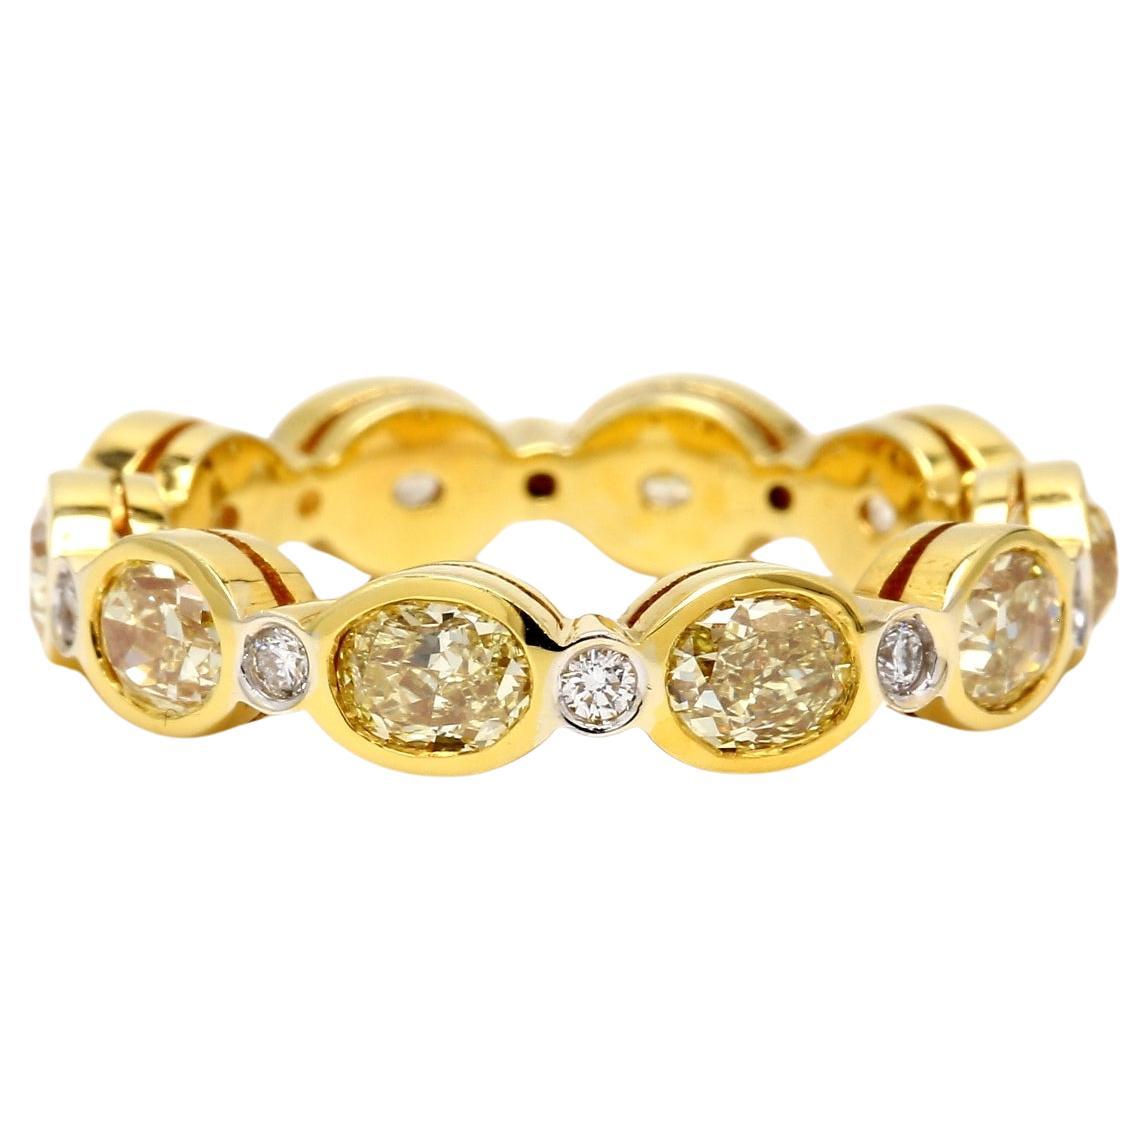 Eternity band in 18K YG with Rounds and Fancy Yellow Oval Diamonds. D3.29ct.t.w. For Sale